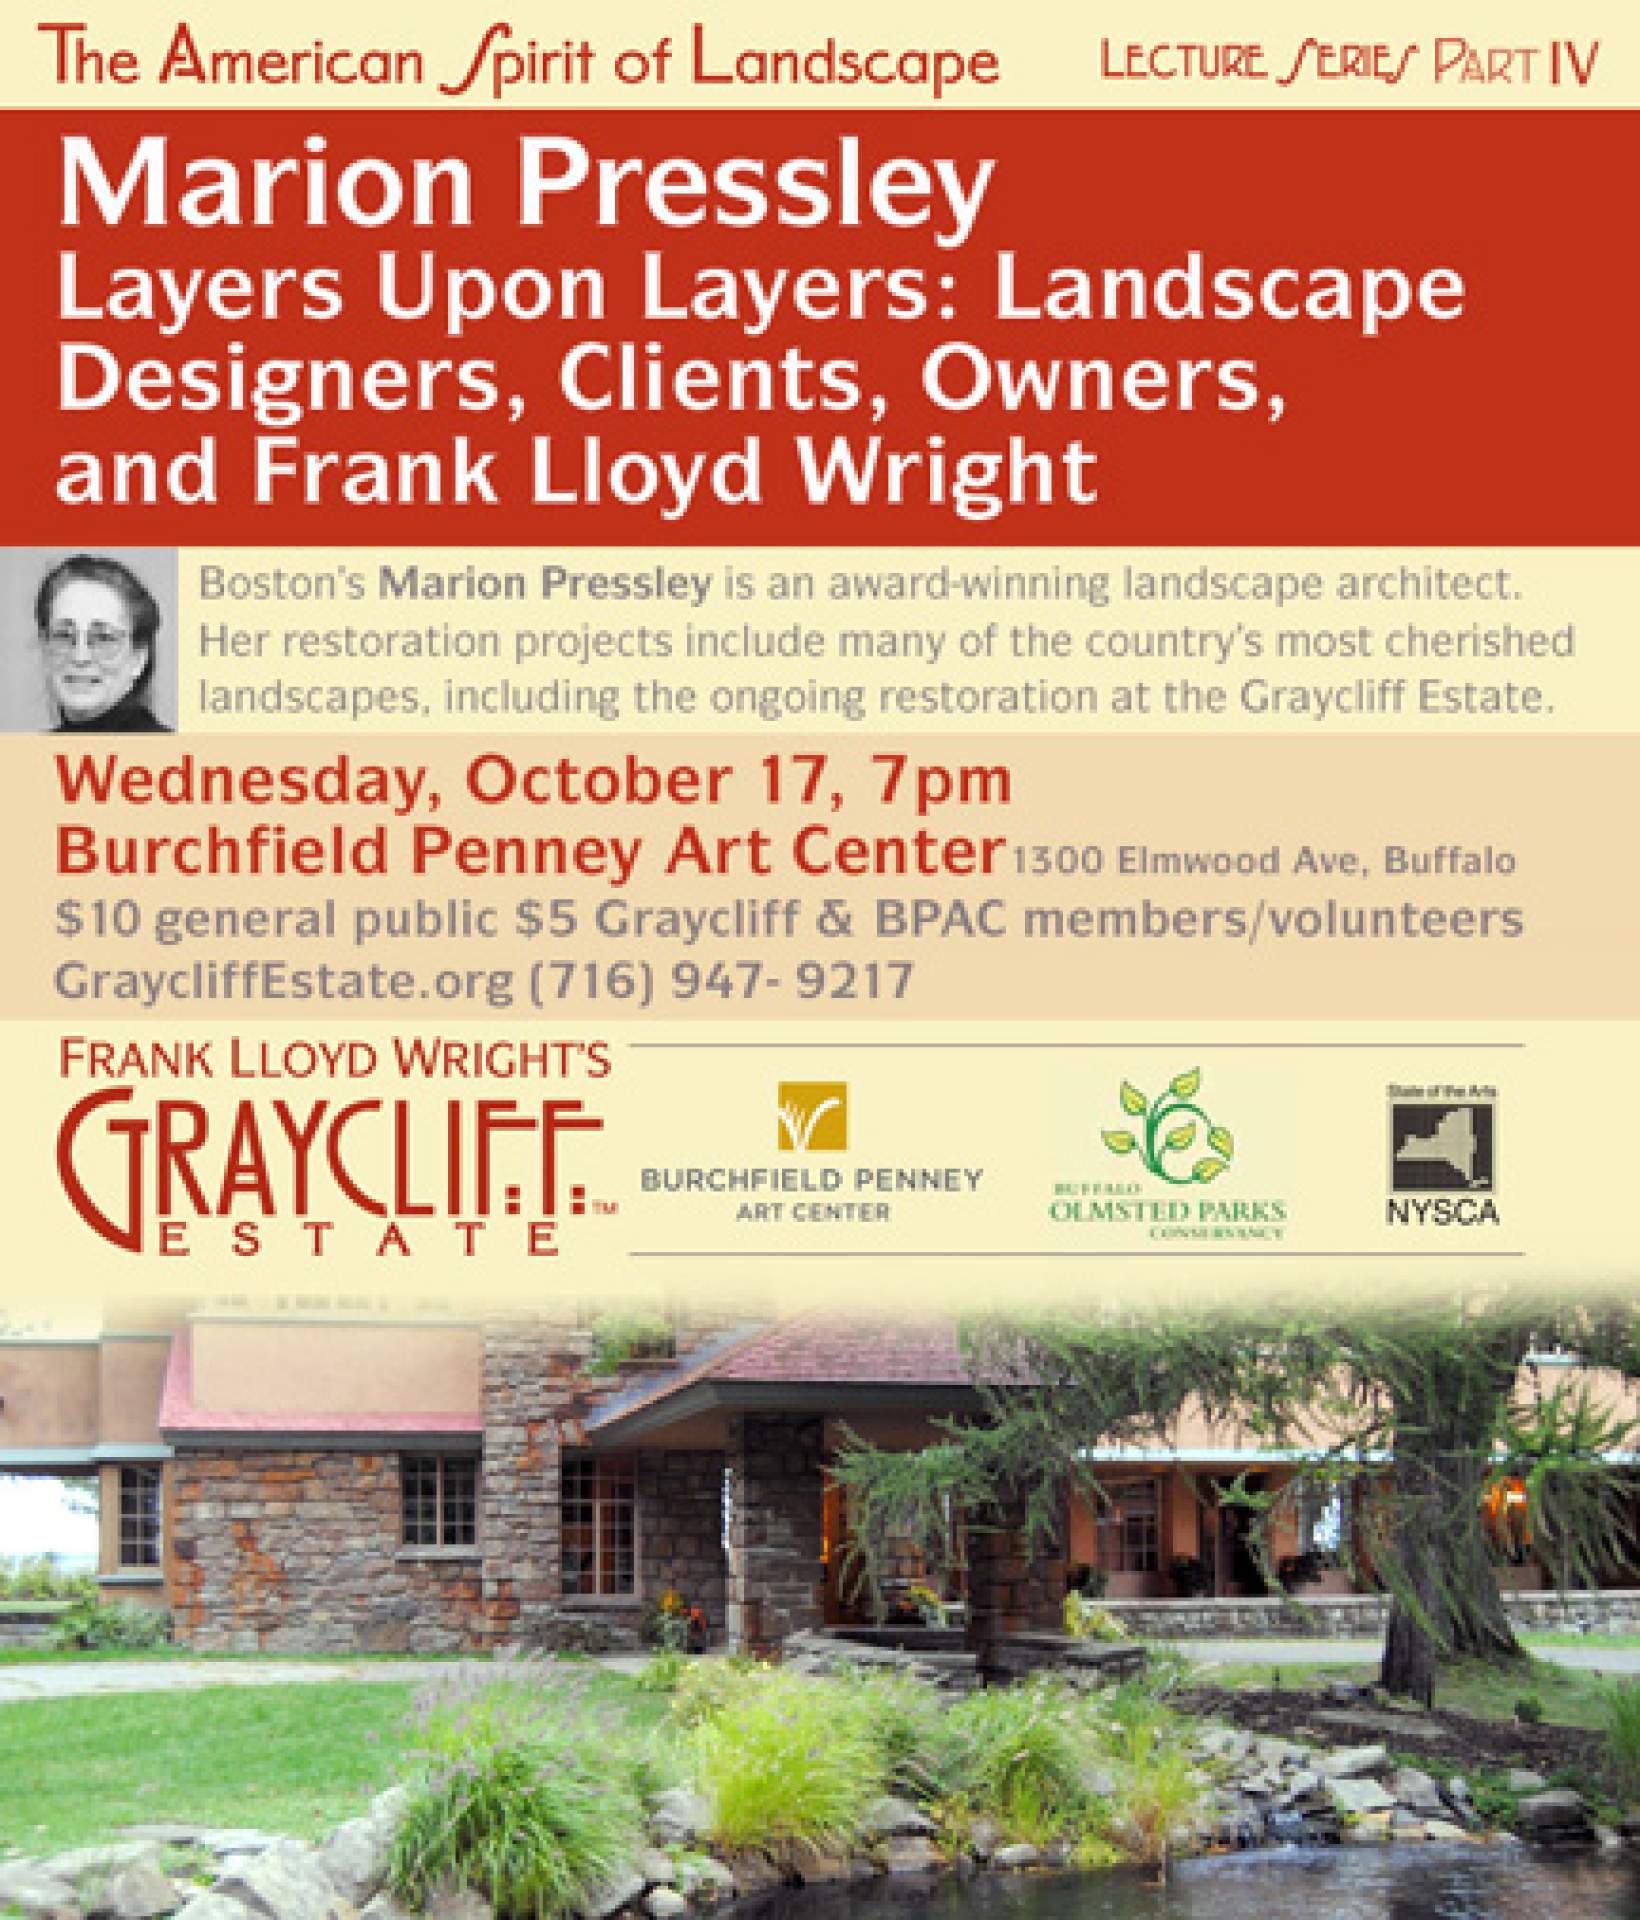 Marion Pressley presents Layers Upon Layers: Landscape Designers, Clients, Owners, and Frank Lloyd Wright